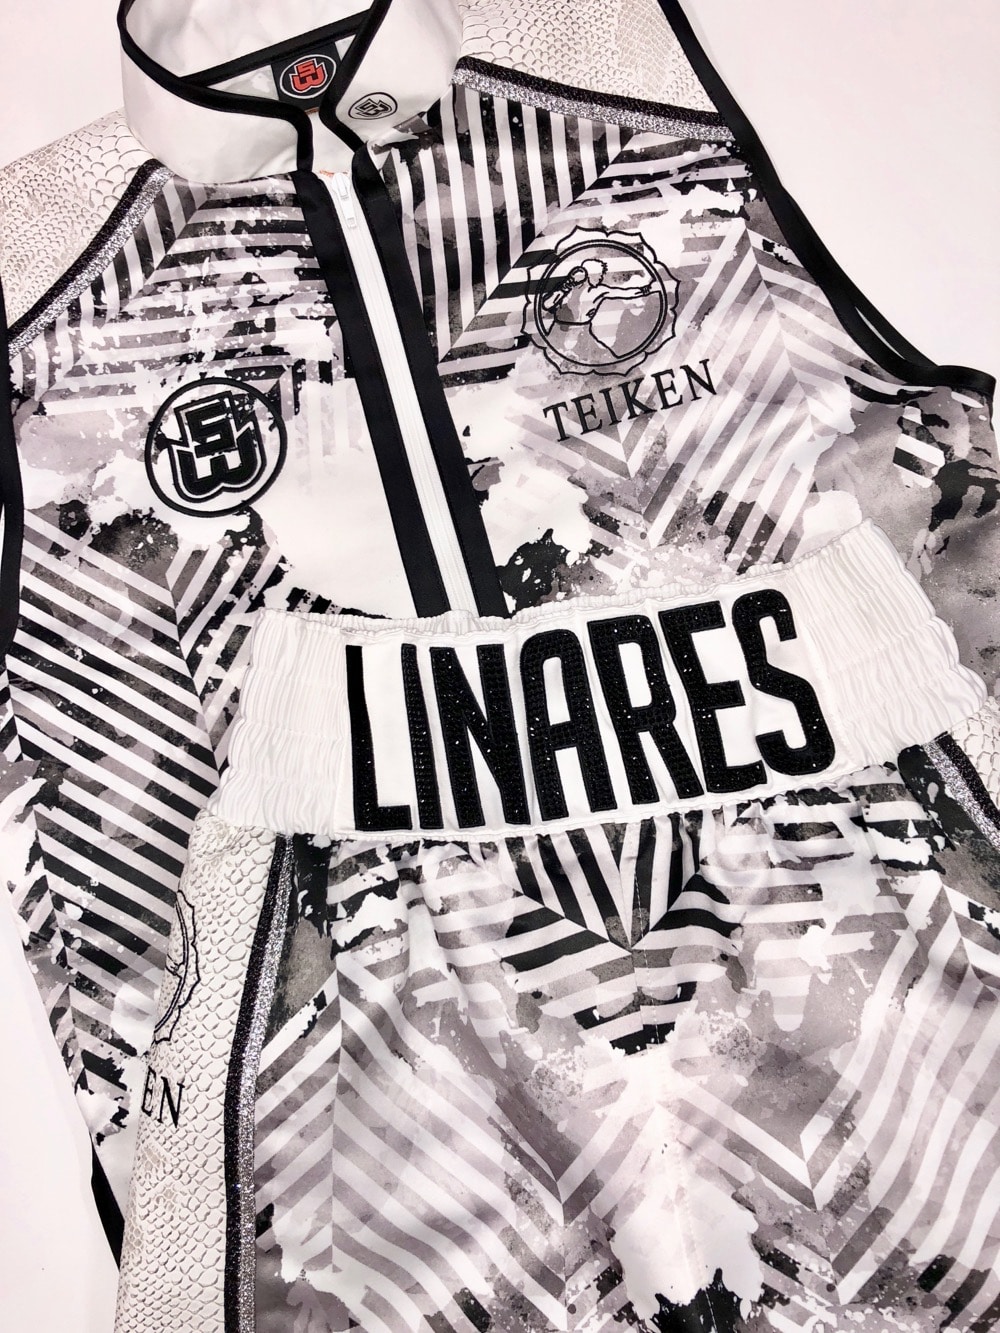 Jorge linares black and white ring wear vs cotto